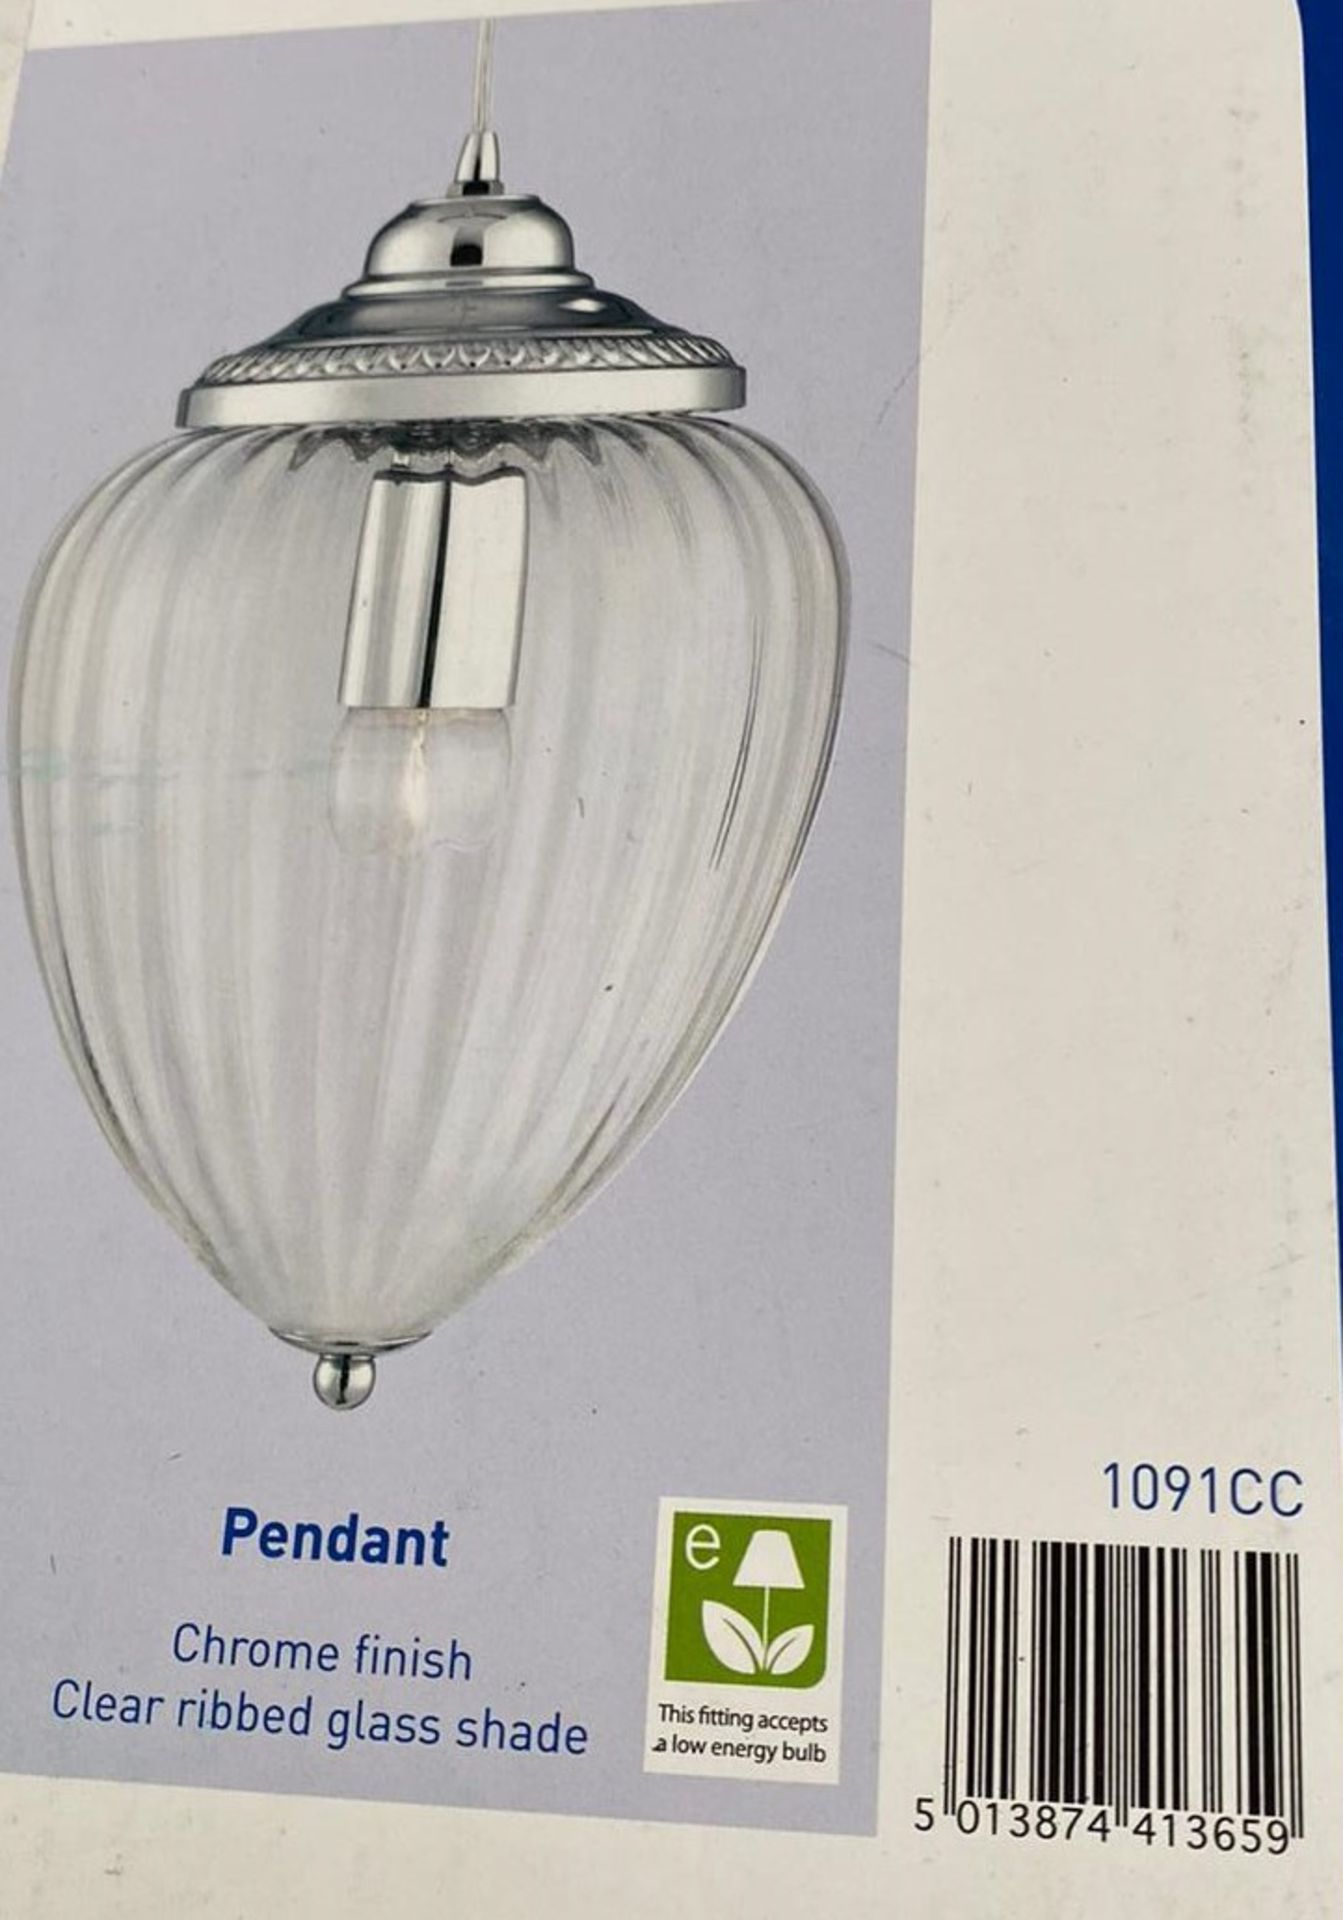 1 x Searchlight Pendant in a chrome finish - Ref: 1091CC - New and Boxed - RRP: £25